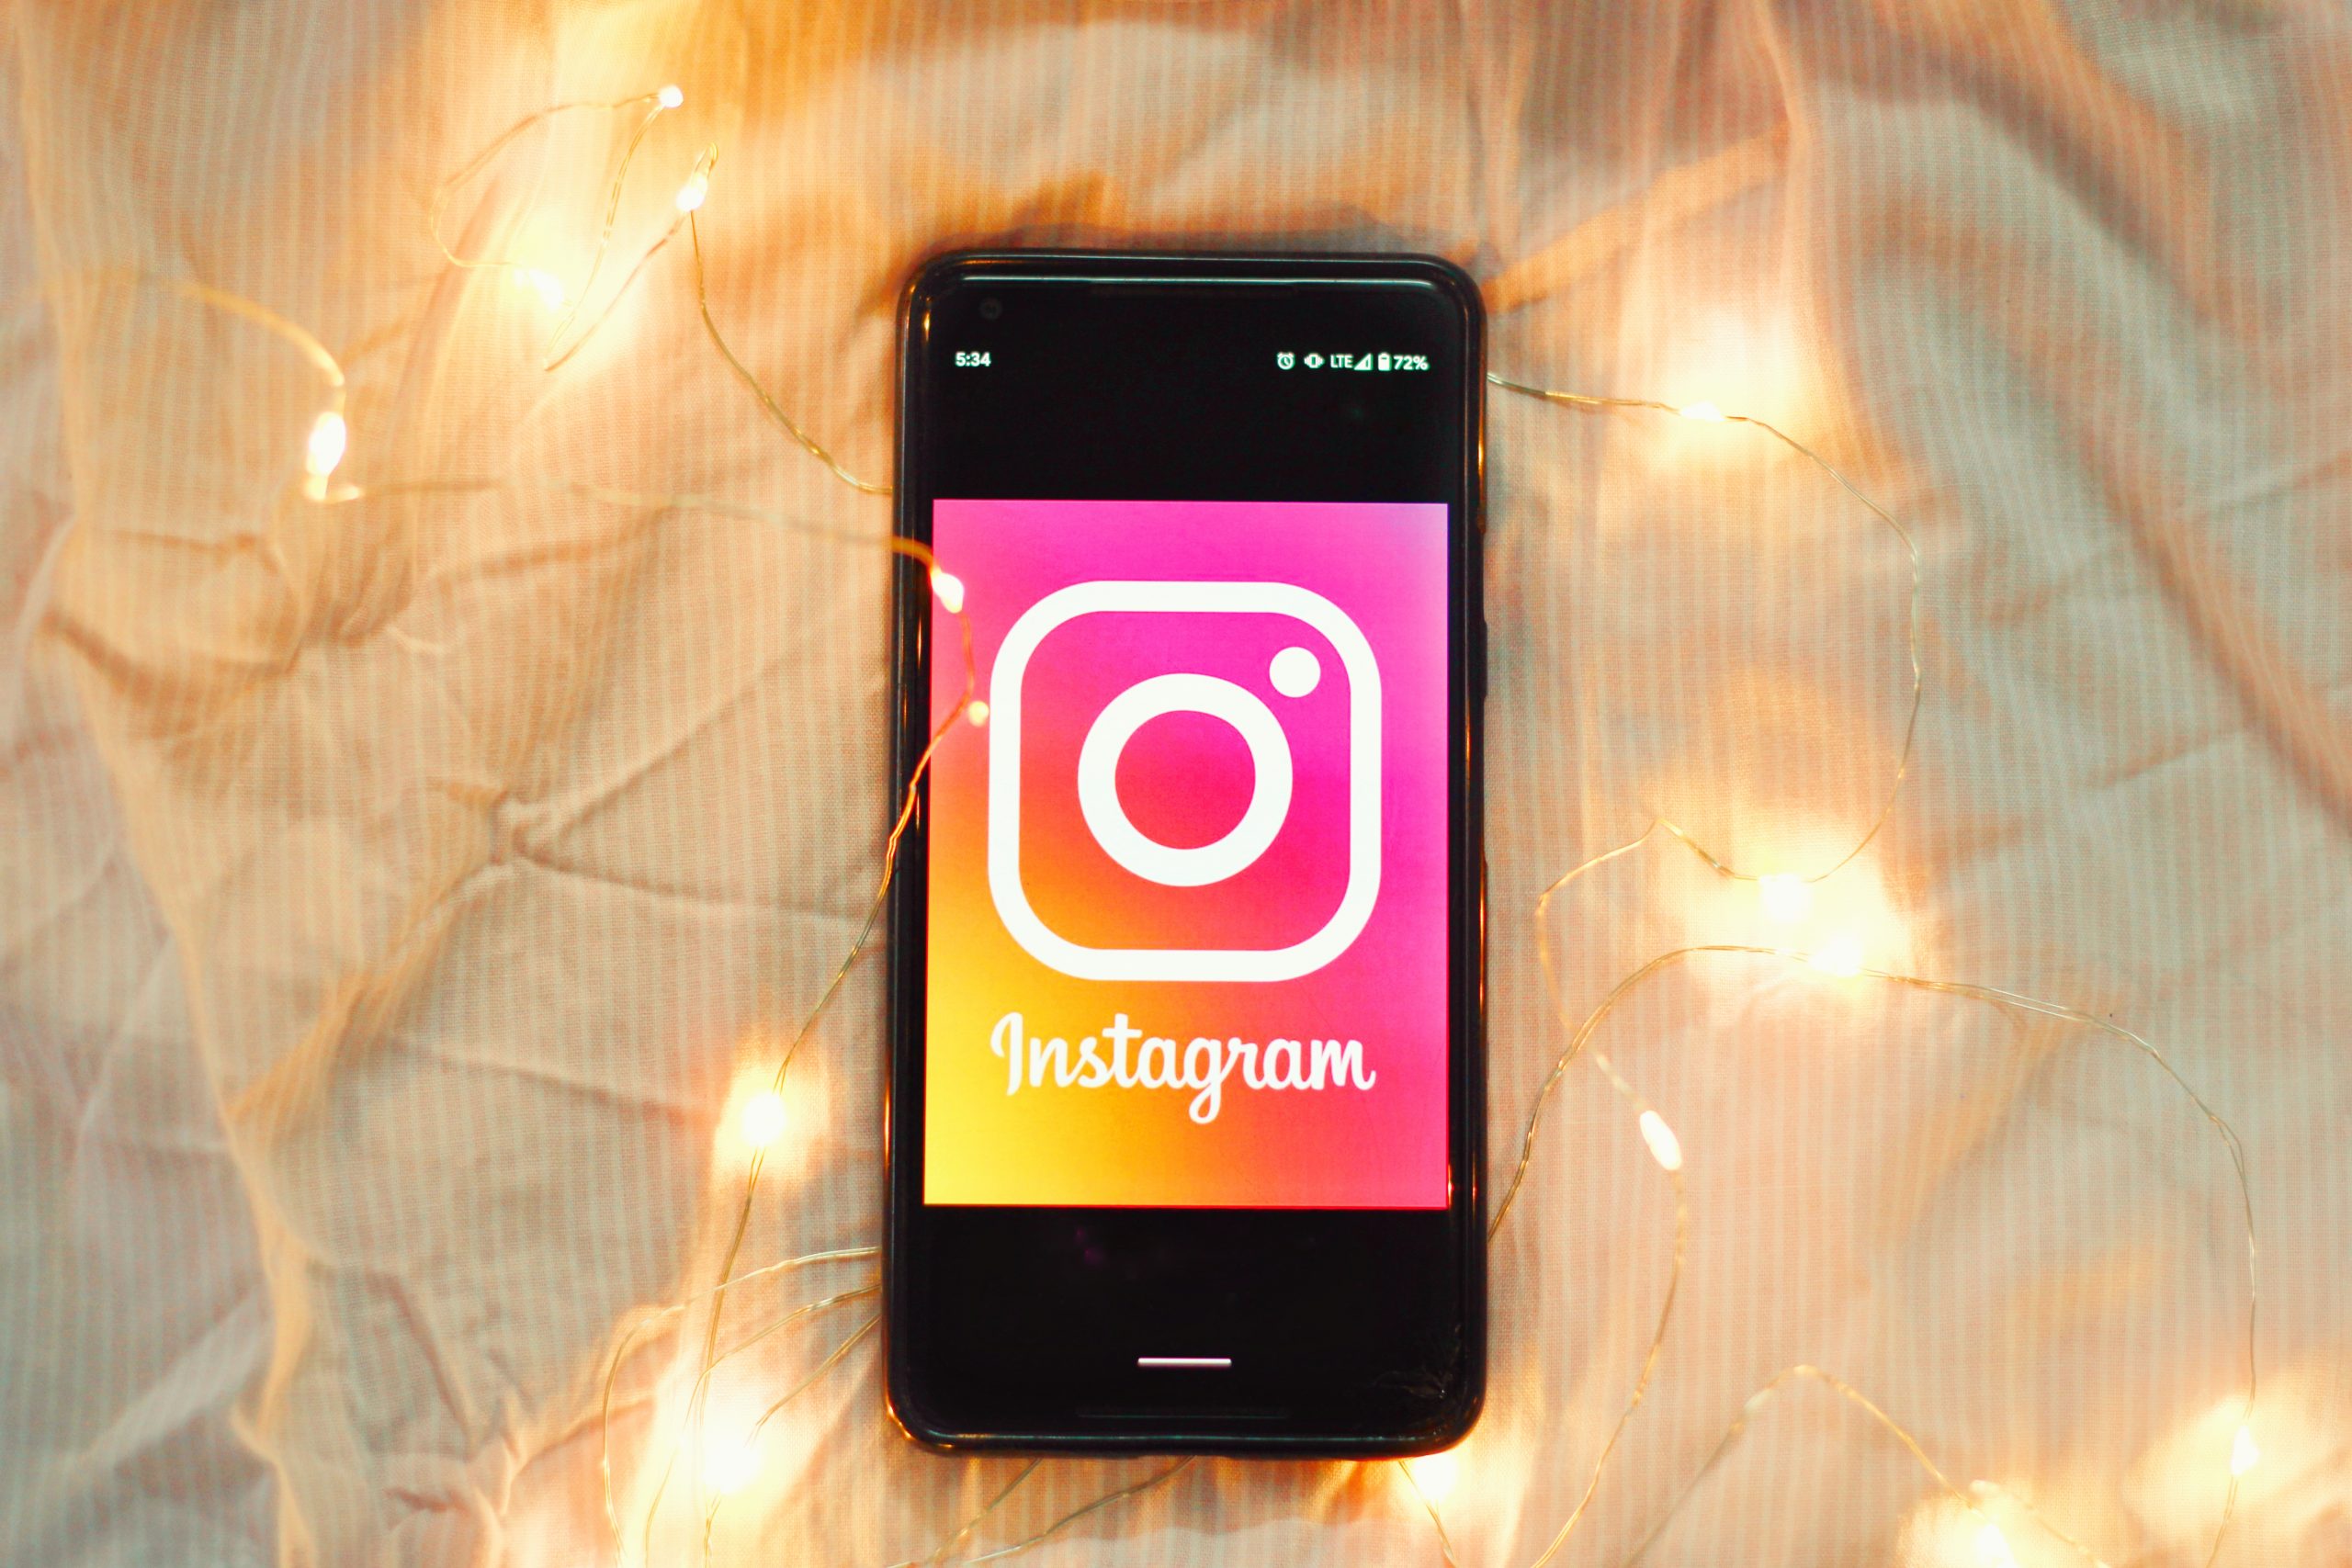 Instagram Stories: what is it and how to use it?